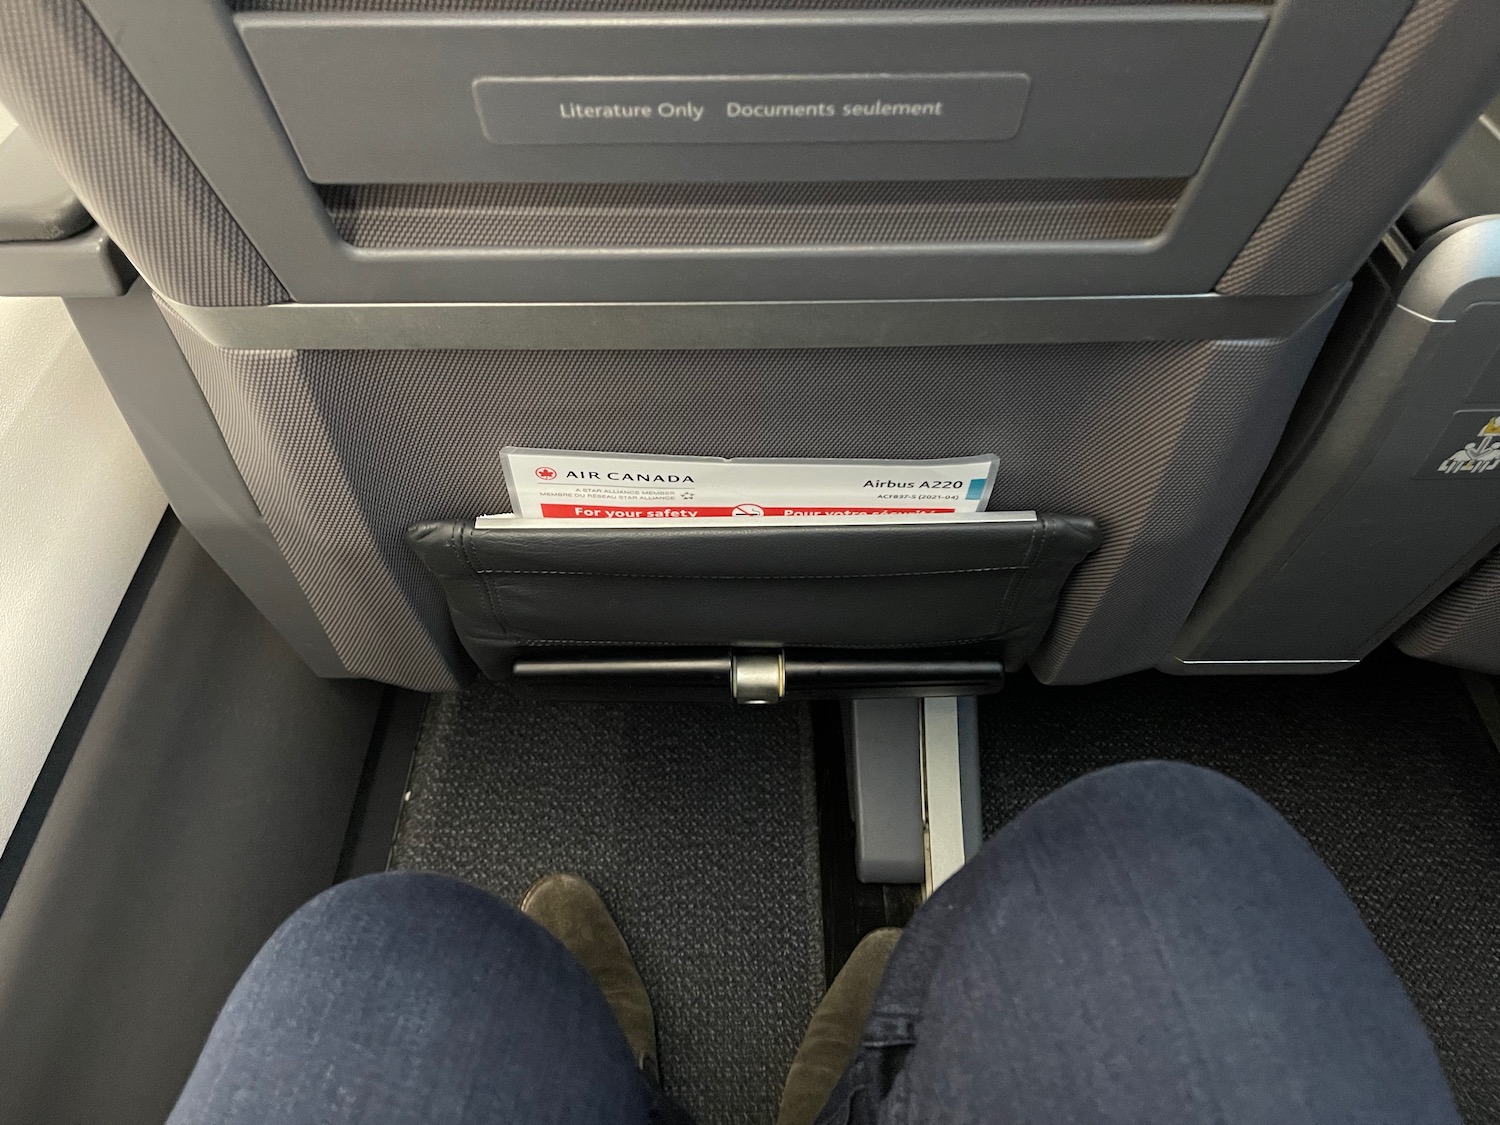 a person's legs in a pocket on an airplane